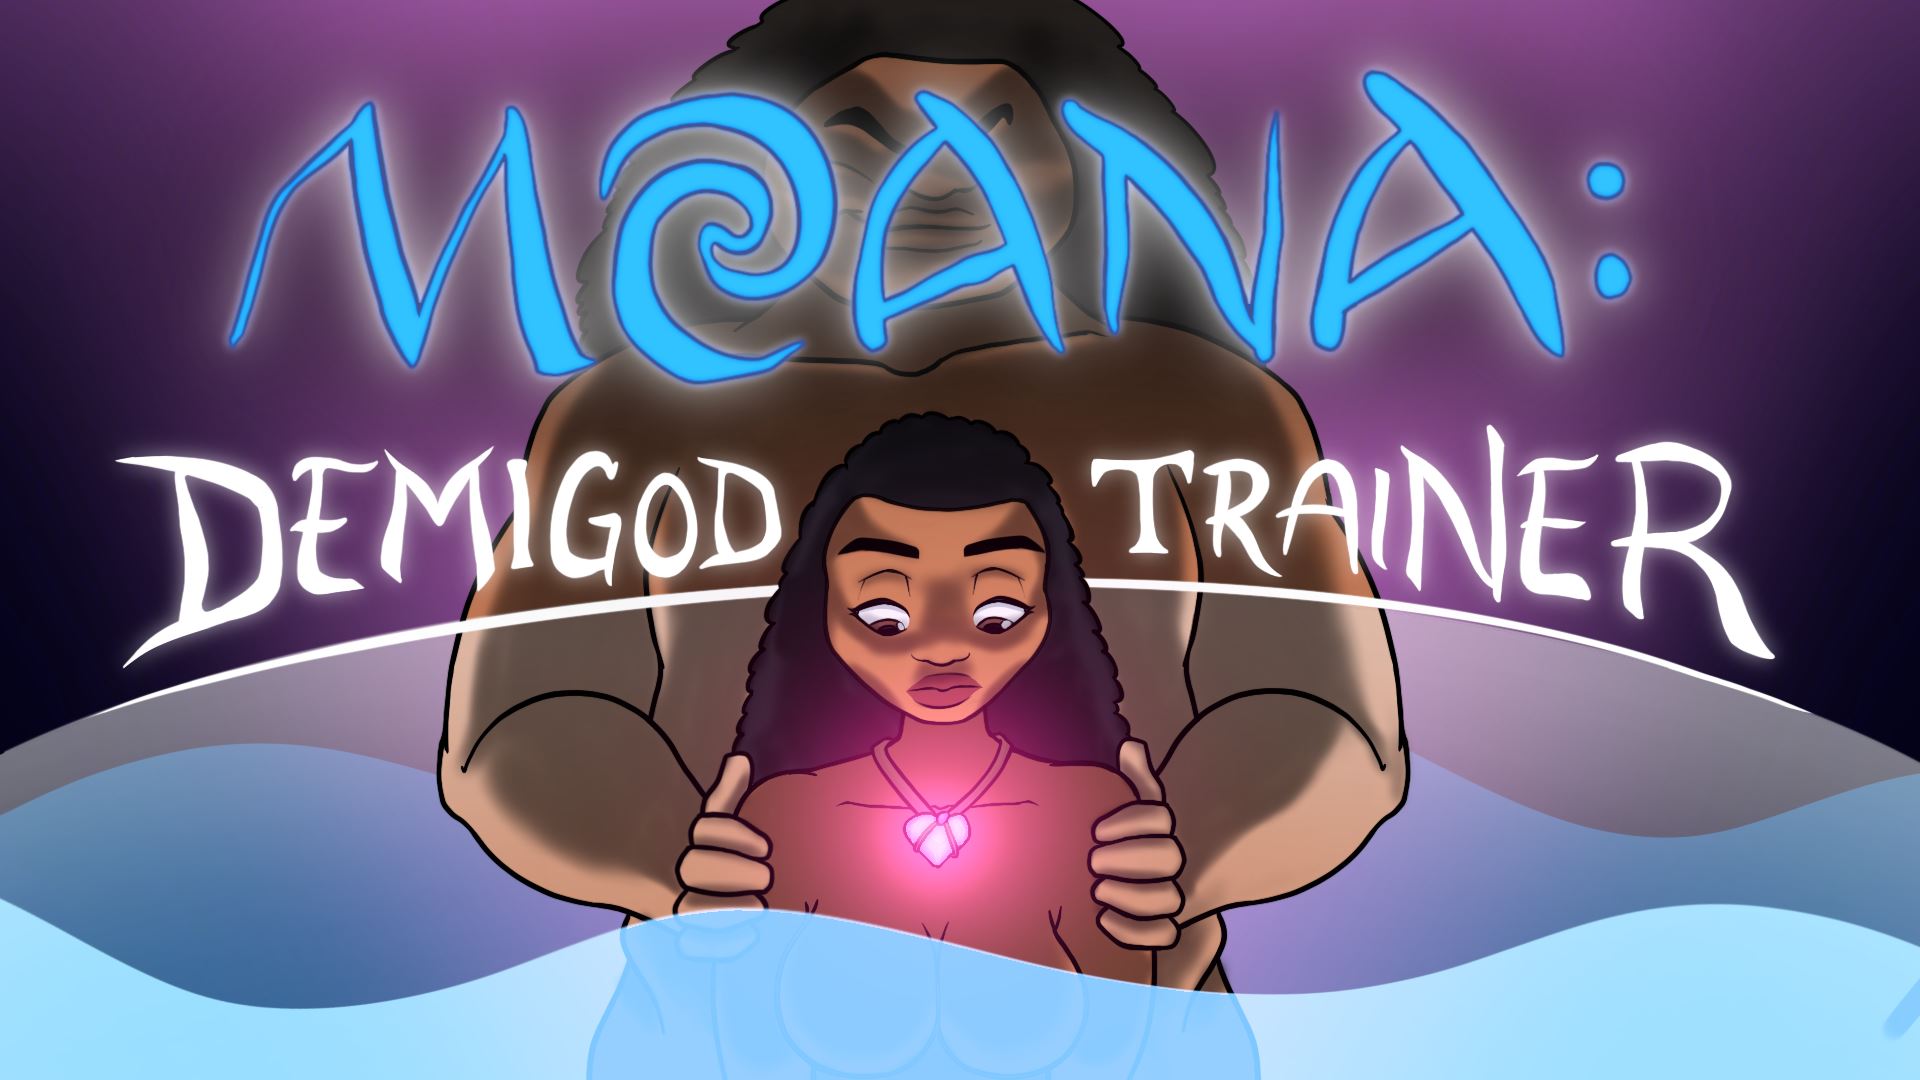 Moana: Demigod Trainer porn xxx game download cover